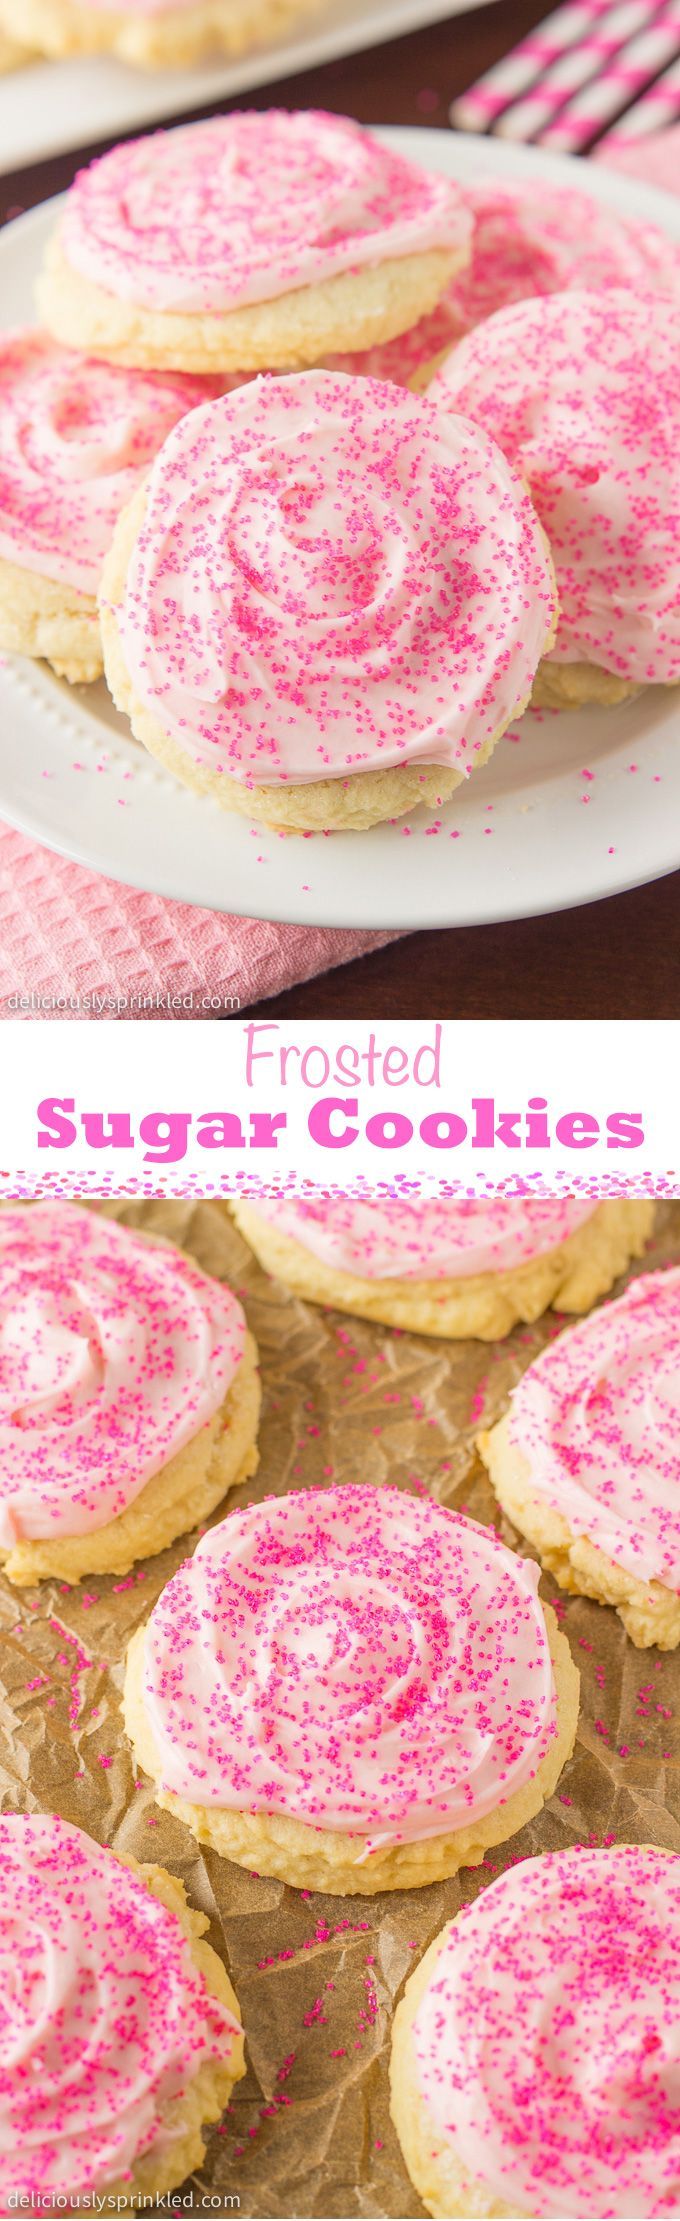 The BEST Frosted Sugar Cookies recipe you will ever need! These sugar cookies are topped with vanilla buttercream frosting and